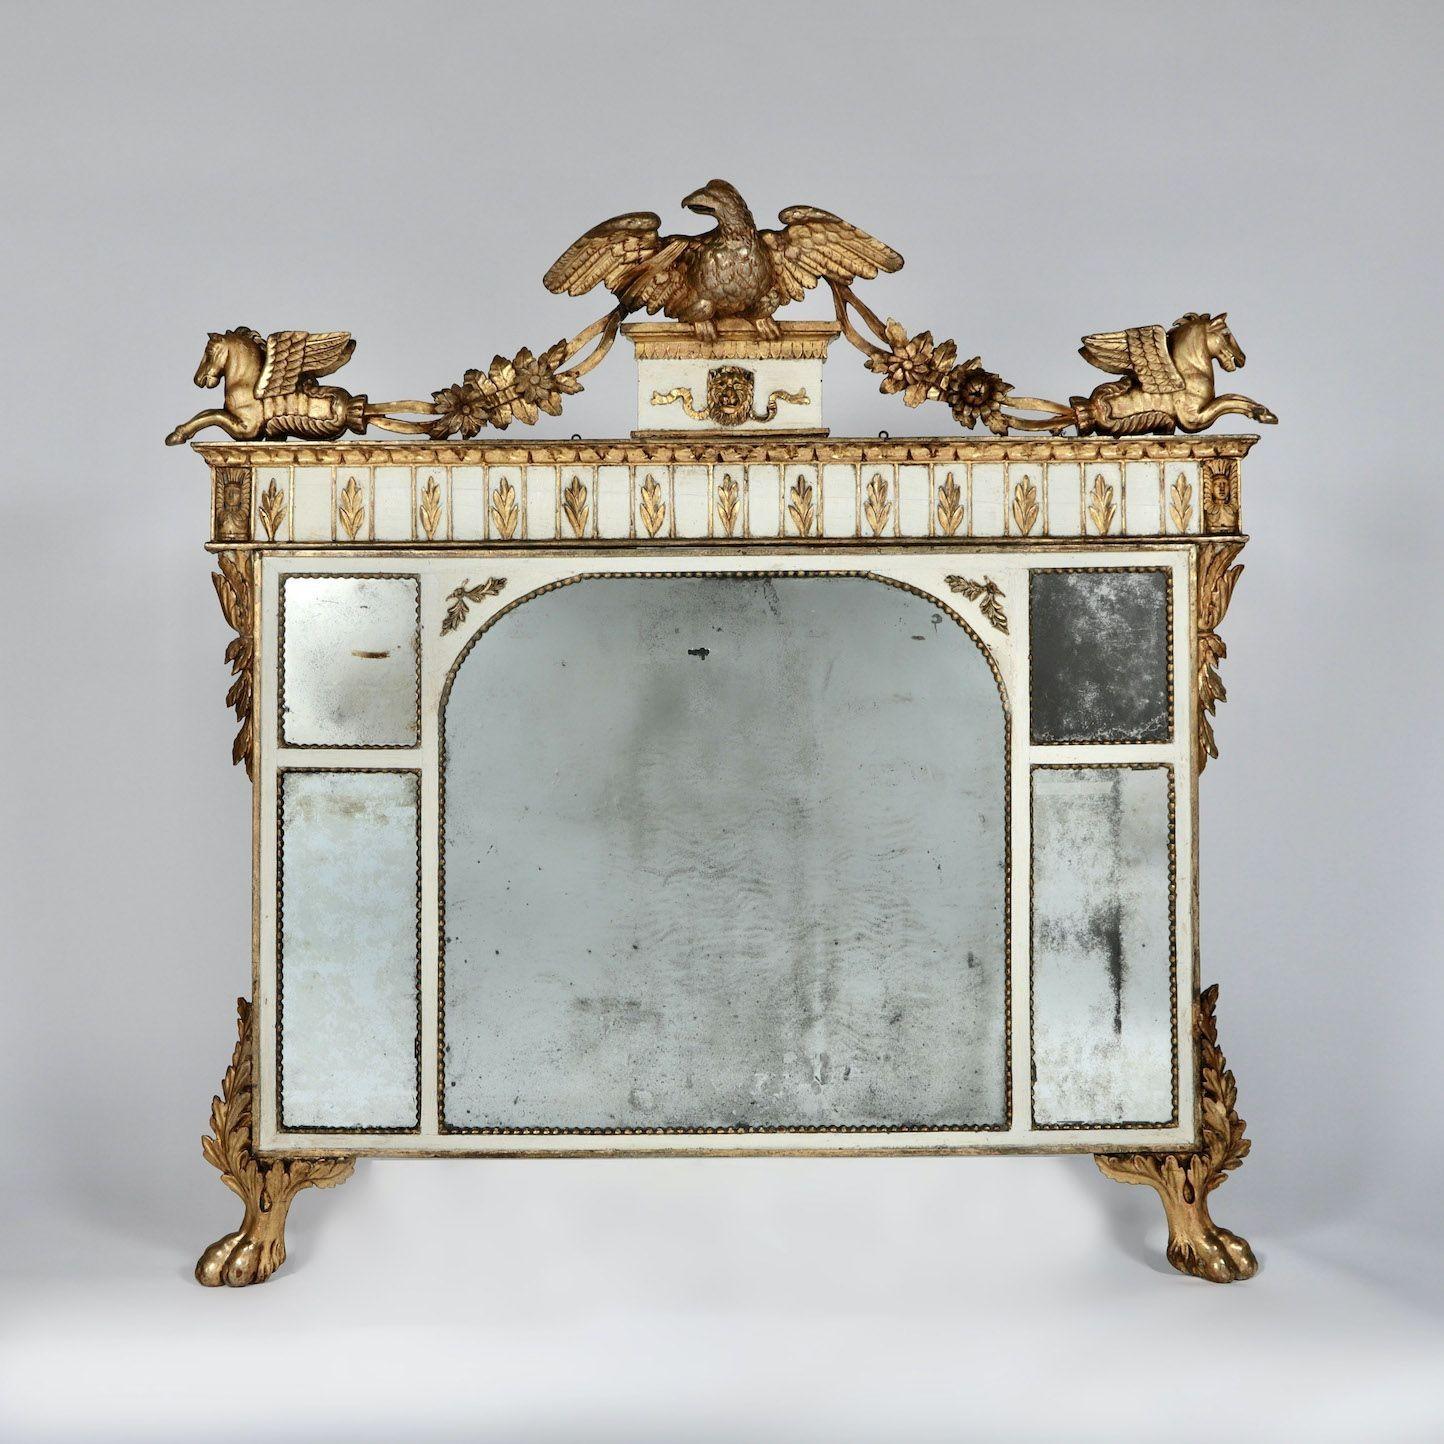 A rare early 19th century Italian Neoclassical period, original giltwood mirror elaborately carved with inspiration from Ancient Rome, circa 1800.  The mirror plates are original and topped by a cresting of an eagle on a pedestal above a carved lion